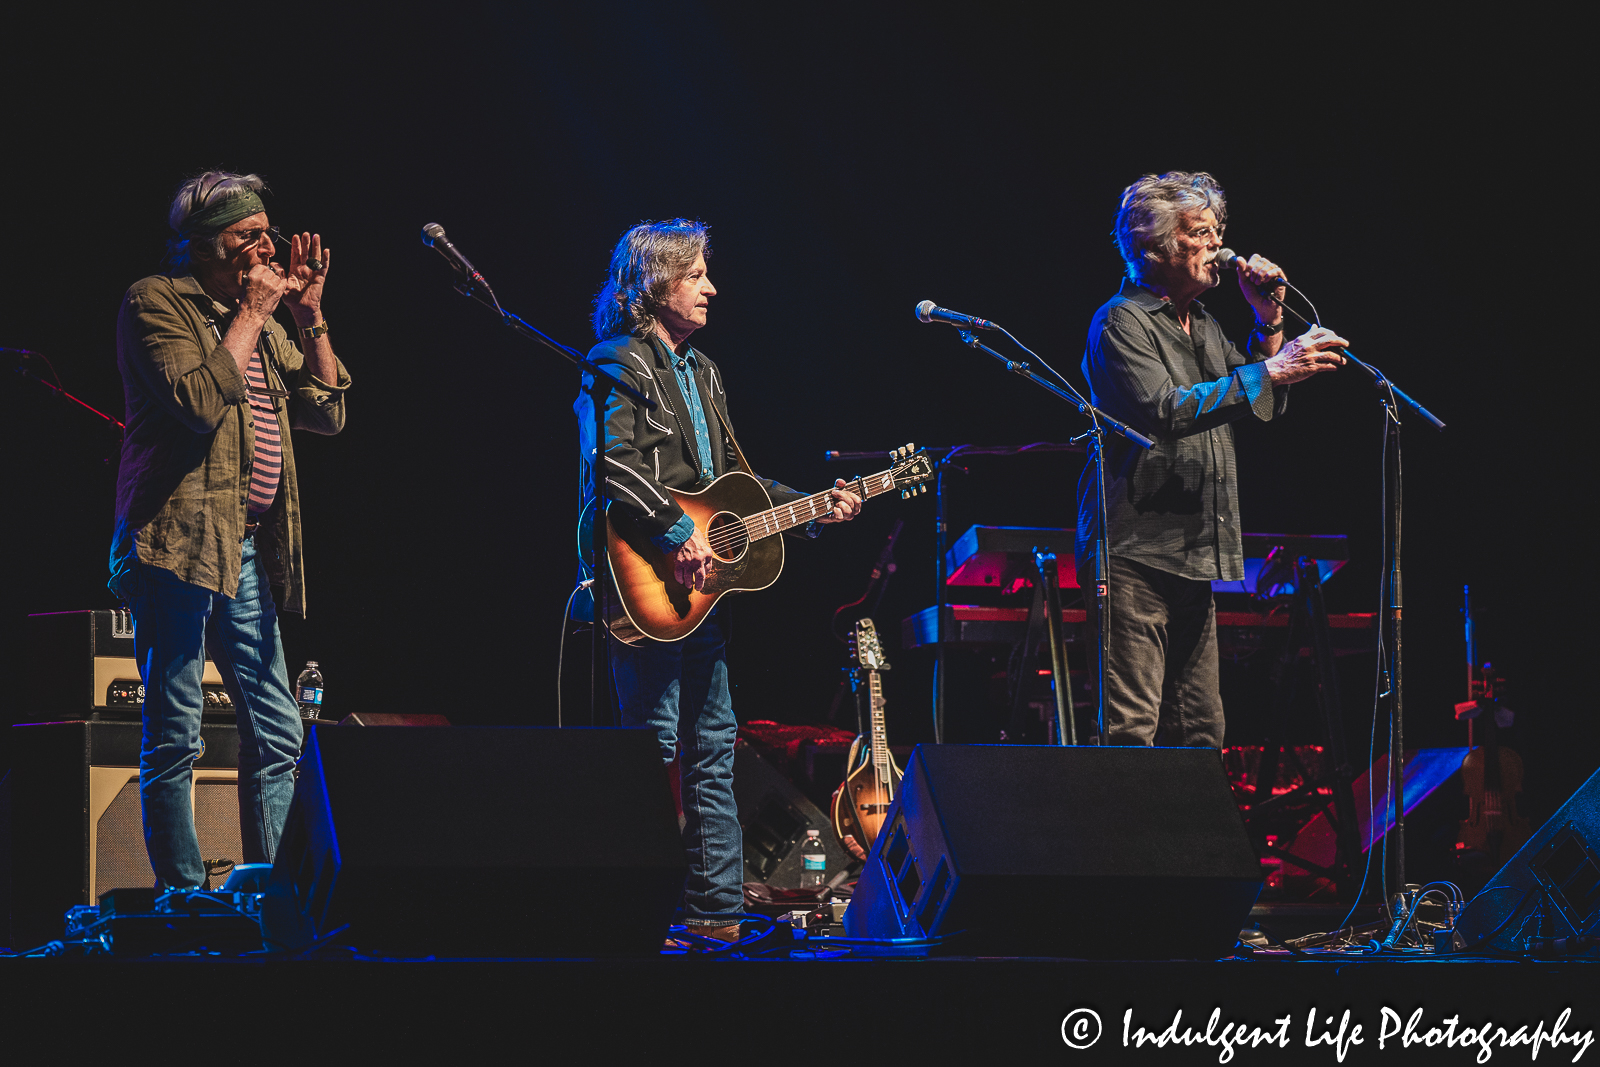 Nitty Gritty Dirt Band members Jimmie Fadden, Jeff Hanna and Bob Carpenter performing together at Ameristar Casino Hotel Kansas City on July 8, 2023.